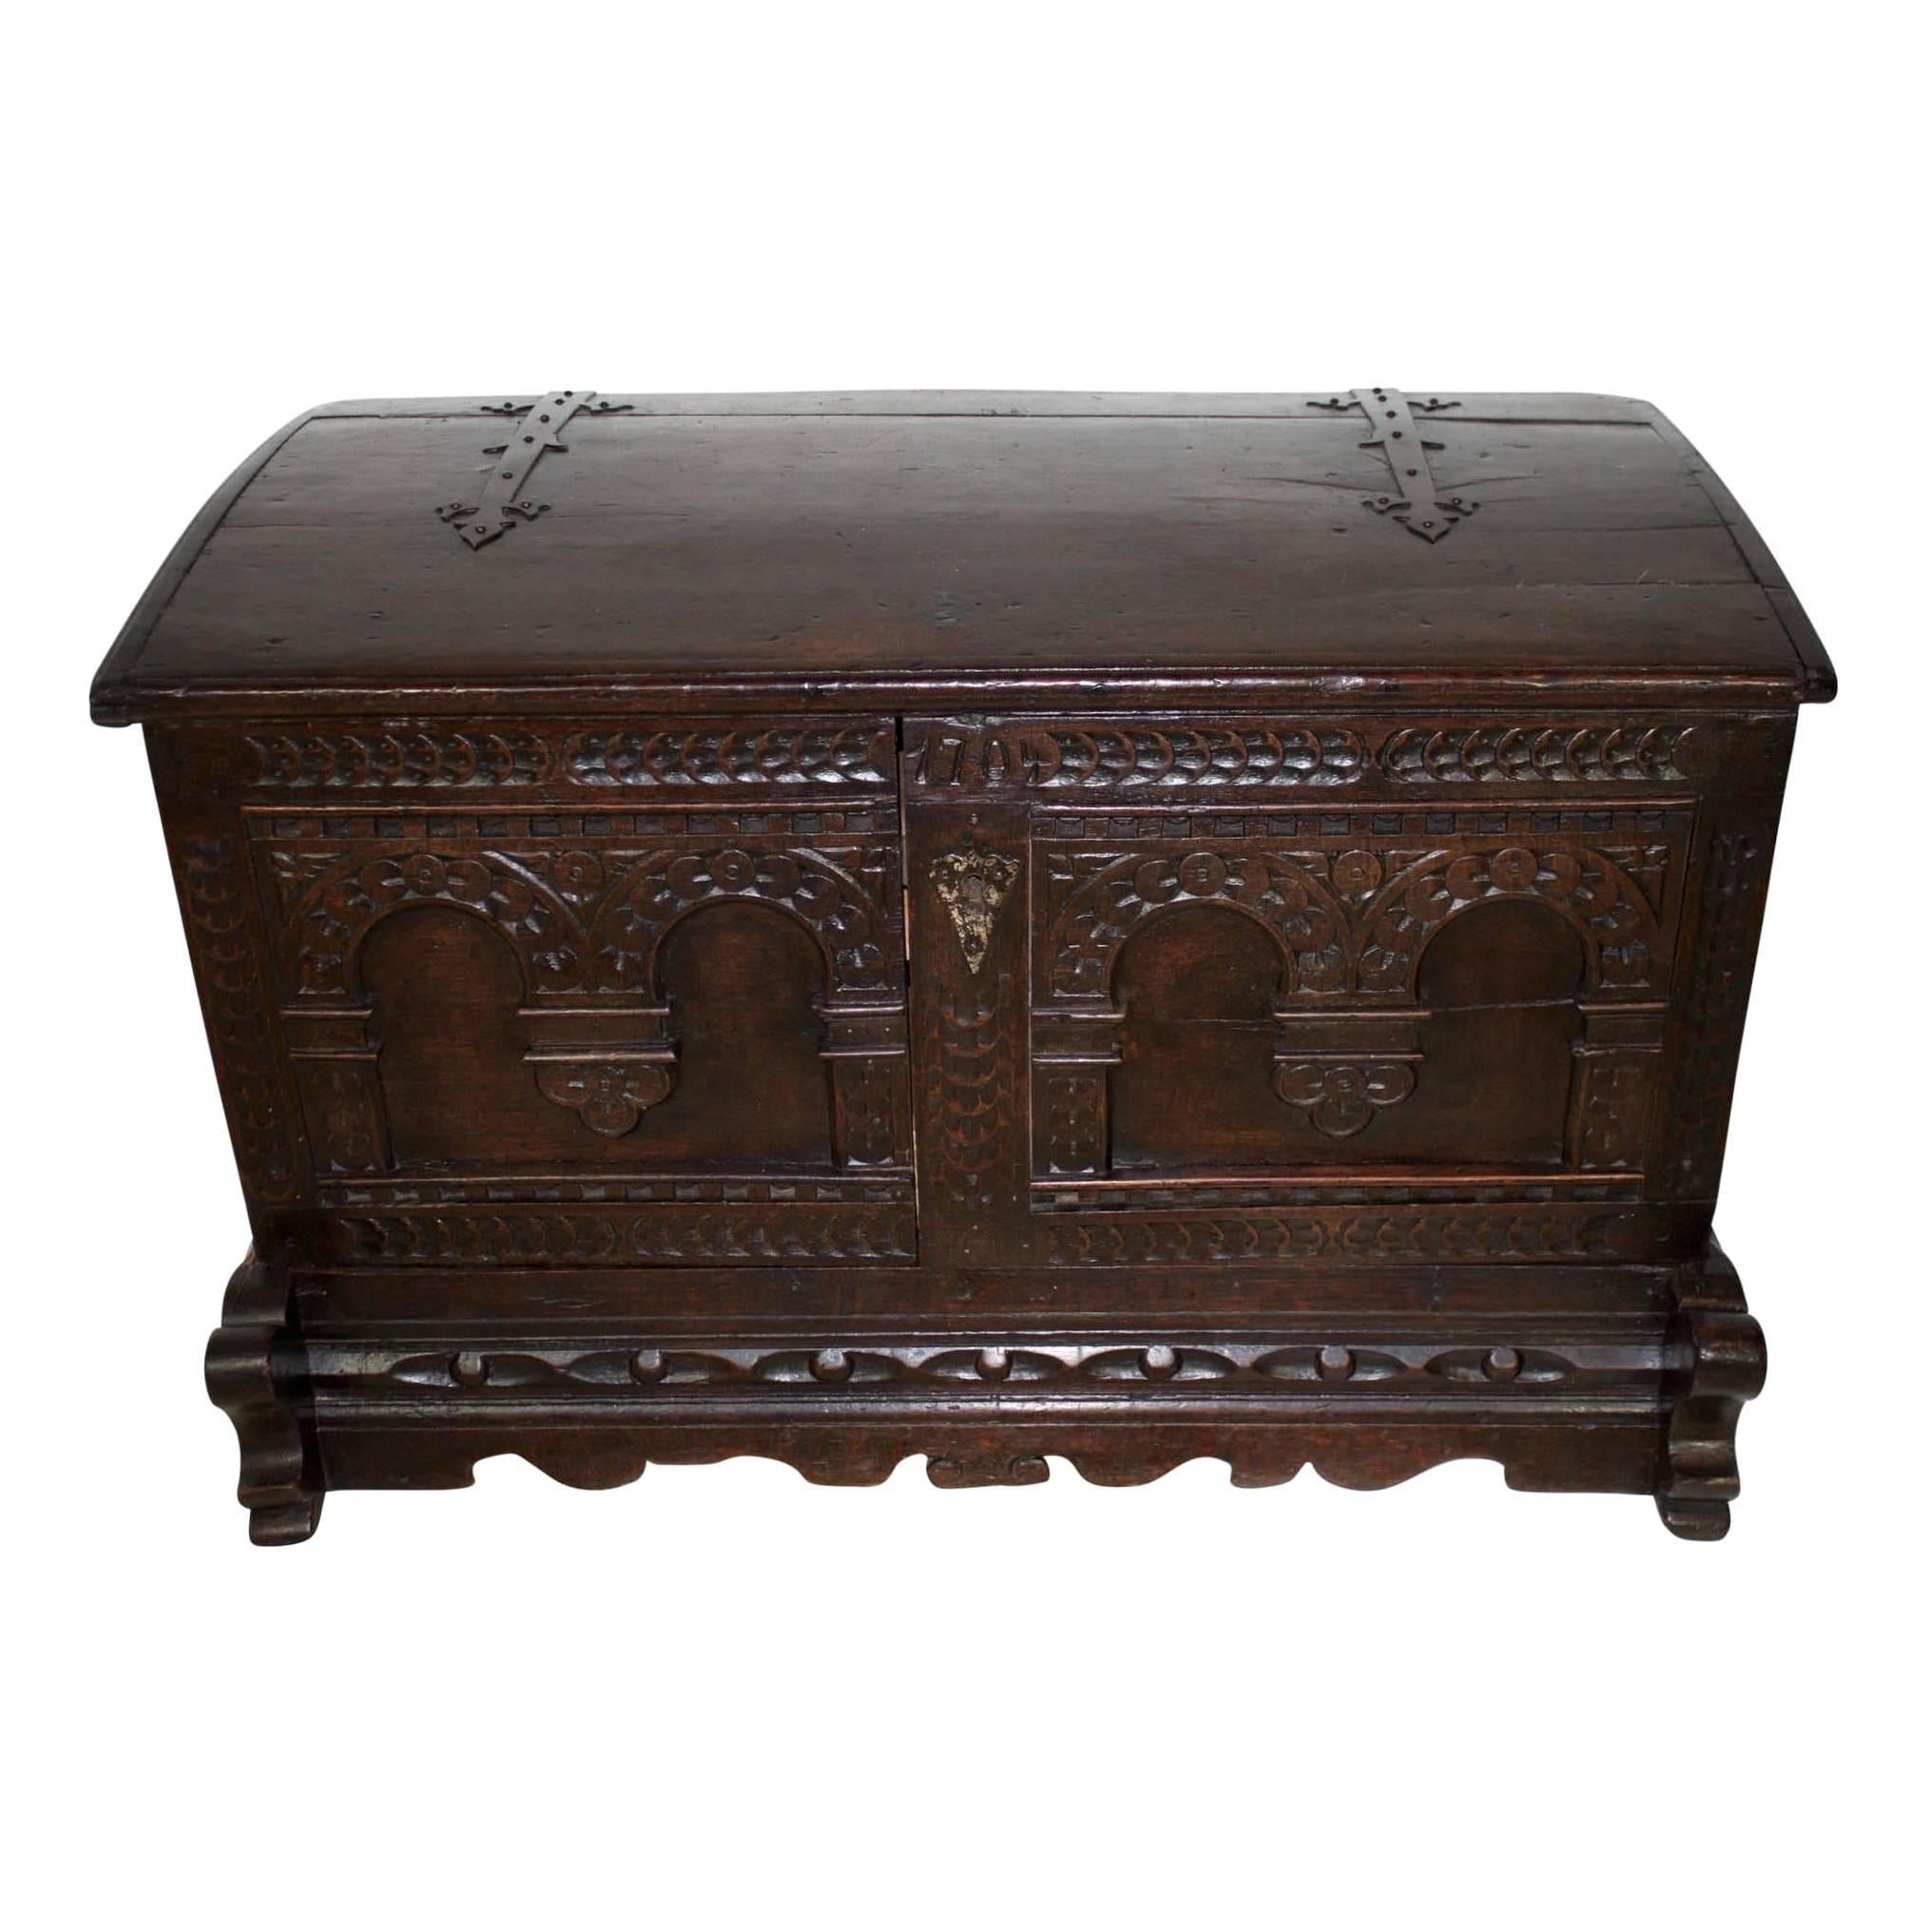 While we usually stick to pieces that are in their original condition, this piece intrigued us so we made an exception. Sometime in the late 19th-early 20th century, this piece went through a transformation. From flip-top trunk or blanket chest to a